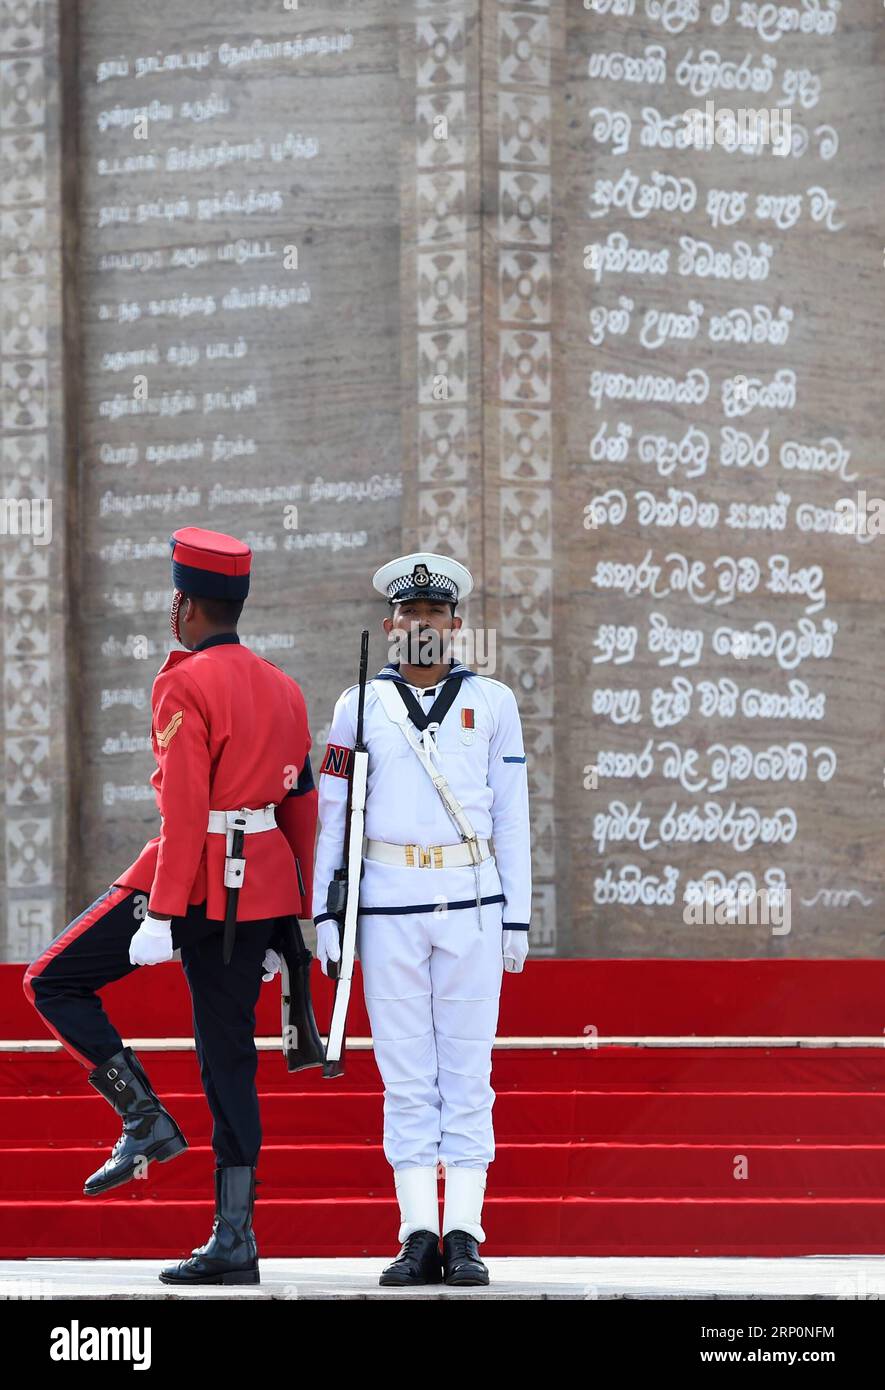 (180520) -- COLOMBO, May 20, 2018 -- Sri Lankan soldiers are seen at a memorial for the fallen soldiers during a commemorative ceremony marking the 9th anniversary of the end of the island s civil war in Colombo, Sri lanka, on May 19, 2018. A.S. ) (hy) SRI LANKA-COLOMBO-ANNIVERSARY-CIVIL WAR Hapuarachc PUBLICATIONxNOTxINxCHN Stock Photo